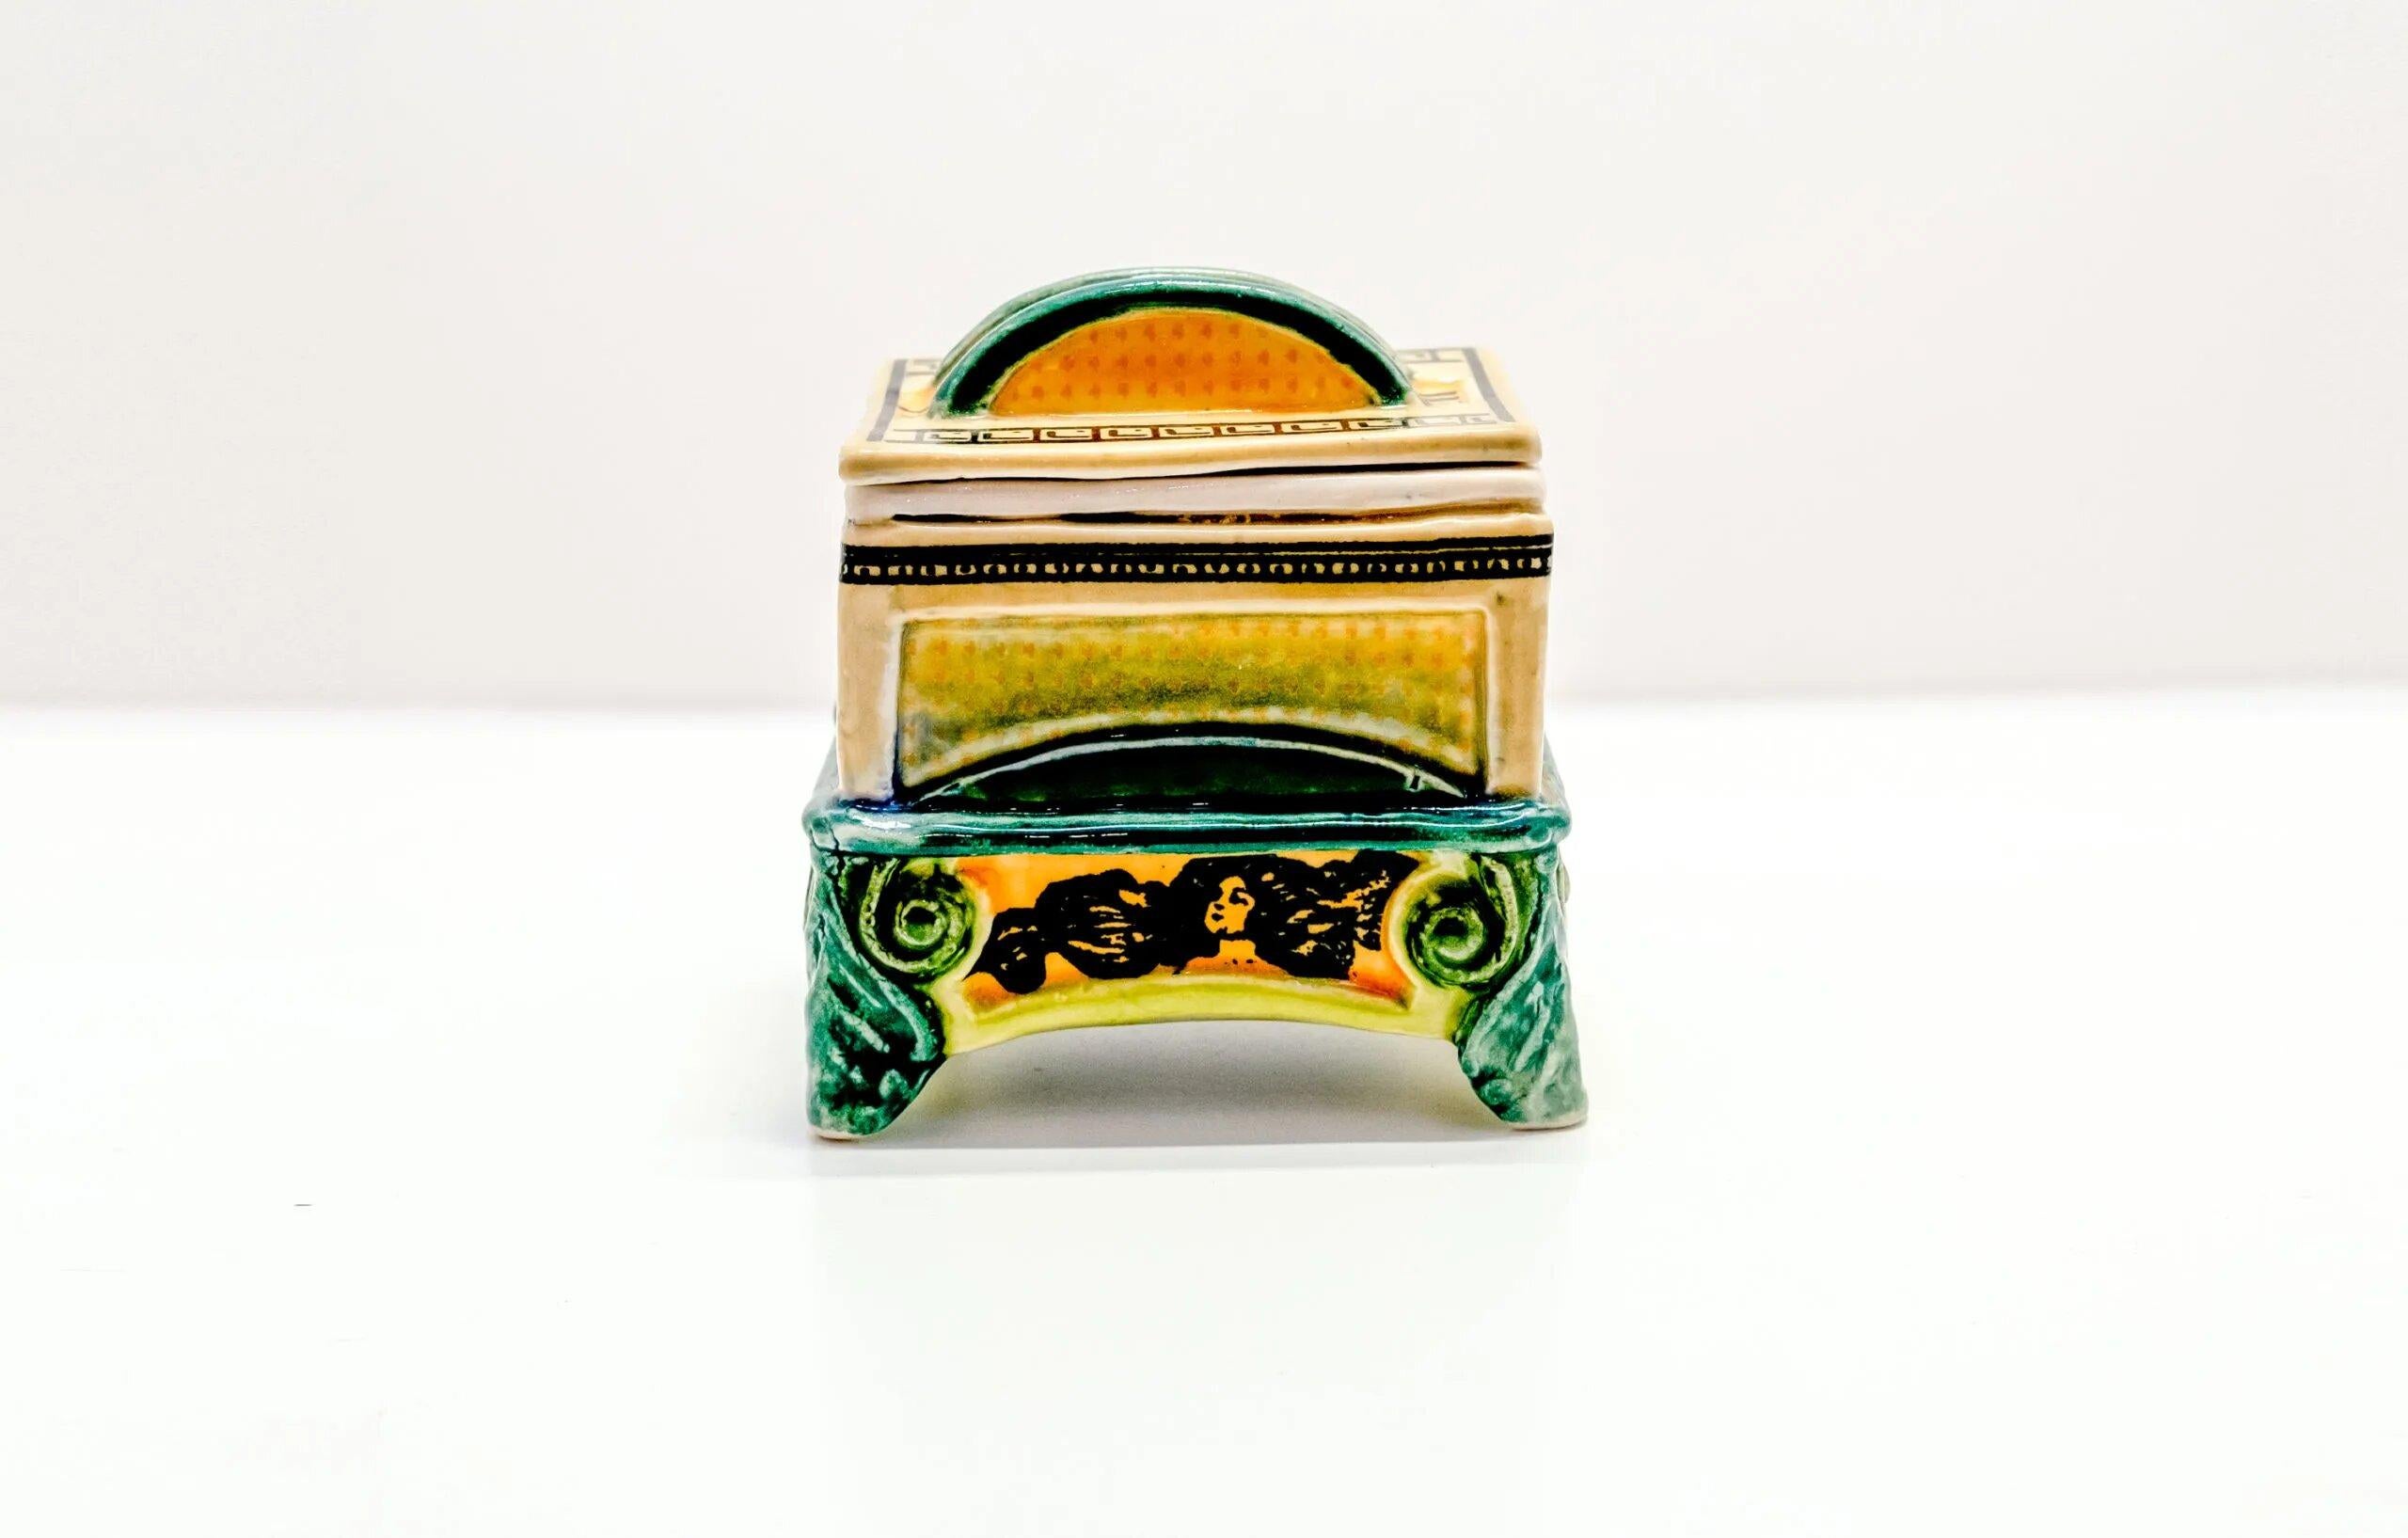 Ceramic Avant-Garde Decorative Lidded Container - Art by Ron Carlson